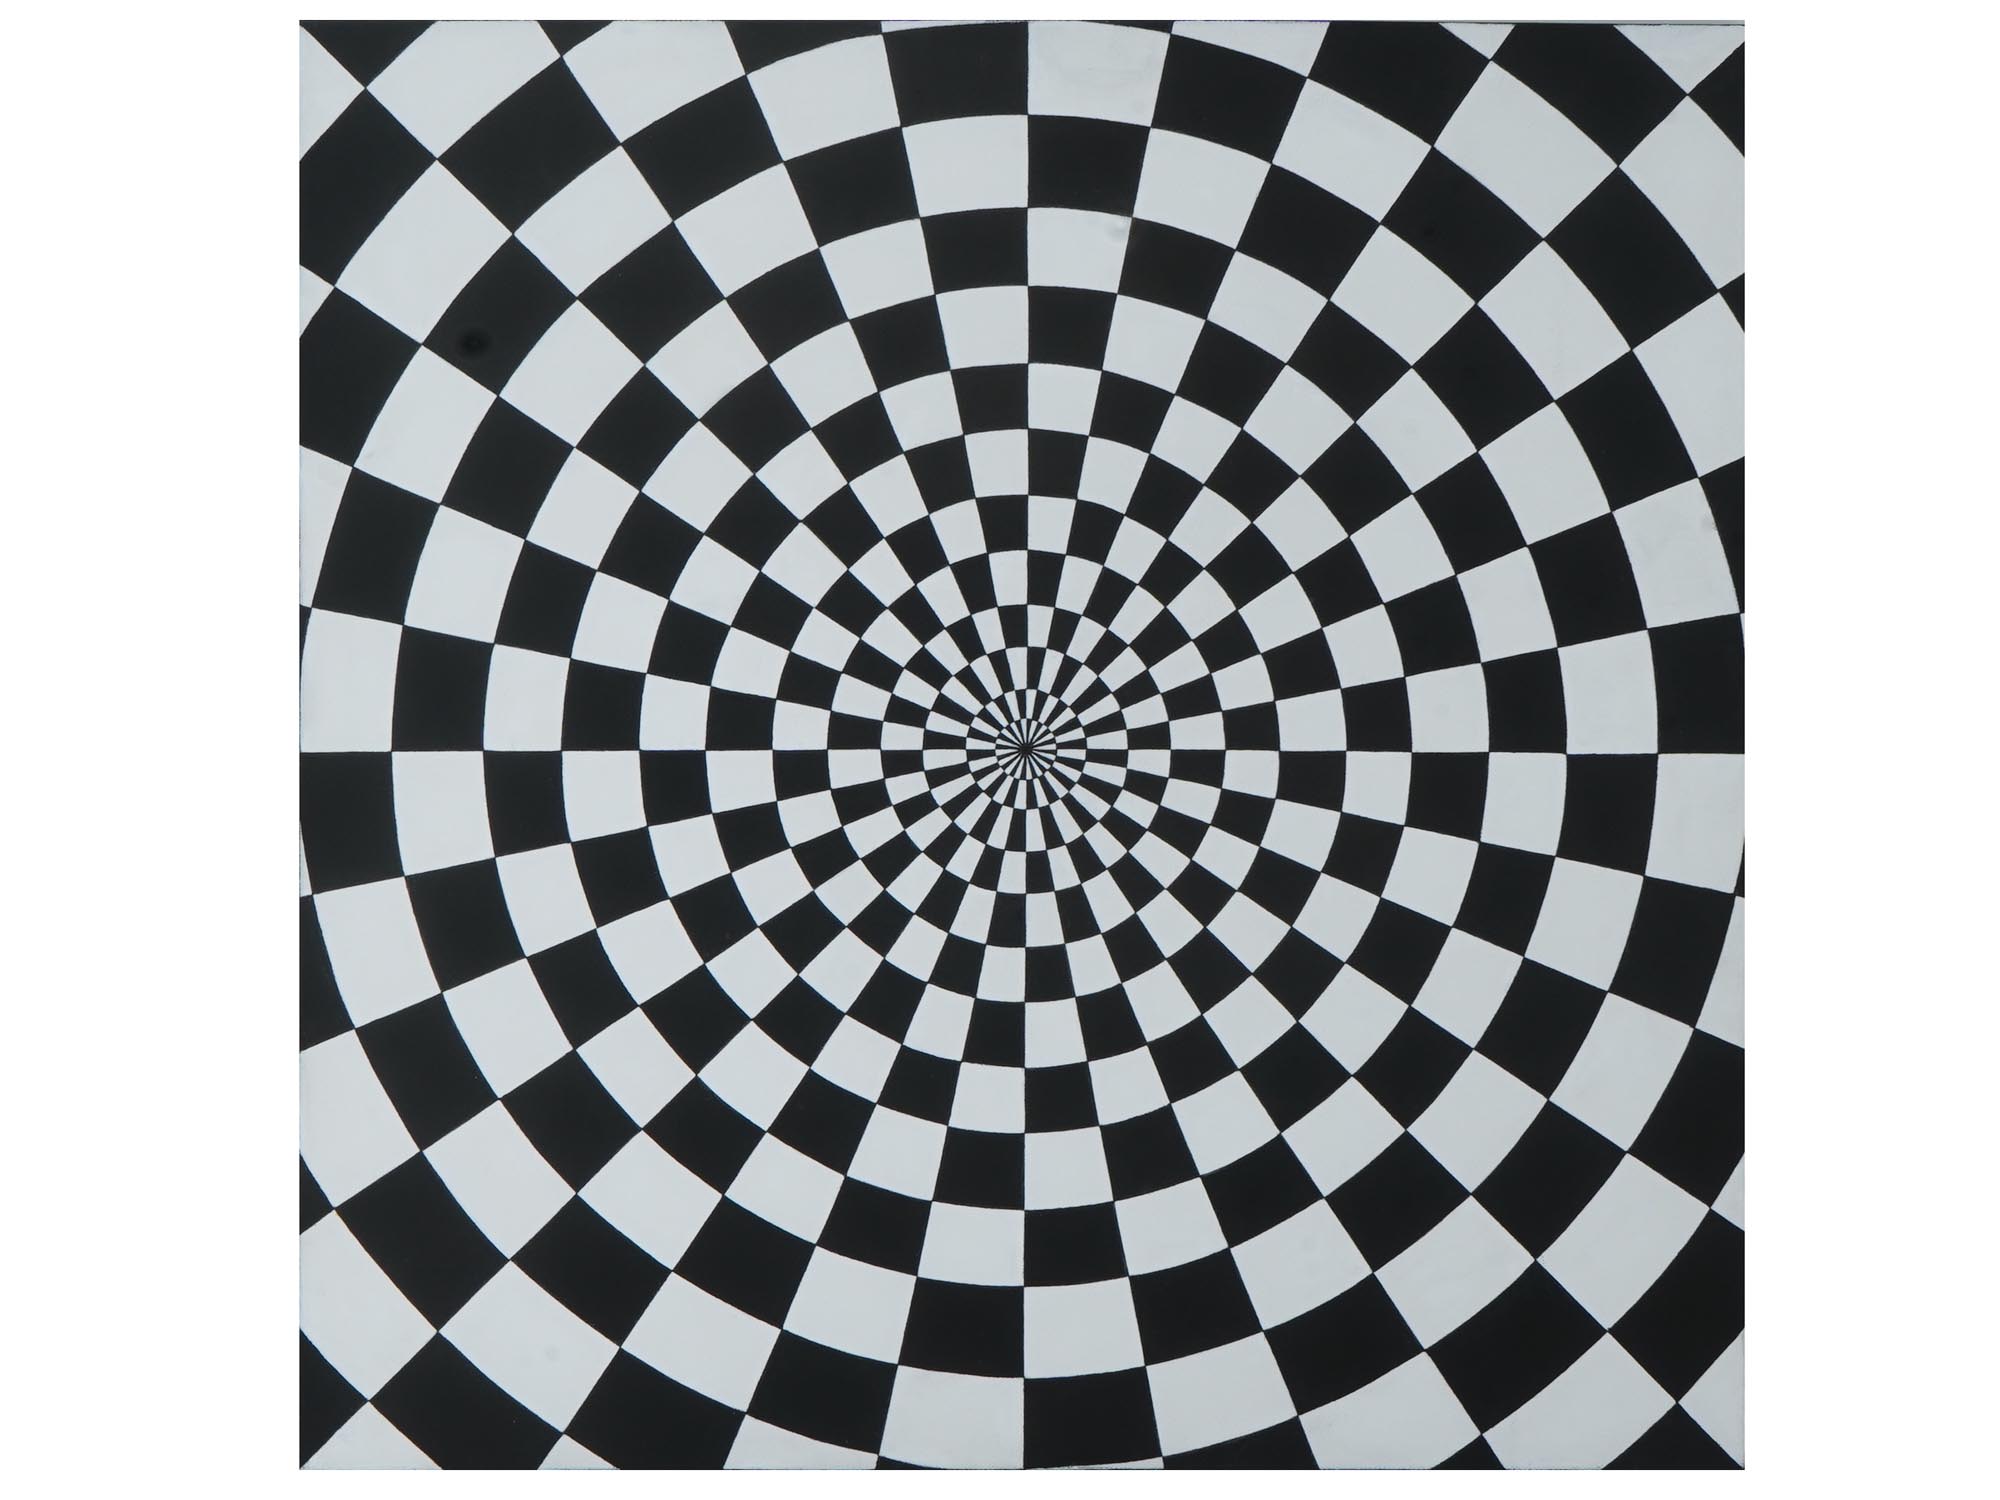 AMERICAN OP ART ACRYLIC PAINTING BY TIM RAY FISHER PIC-0